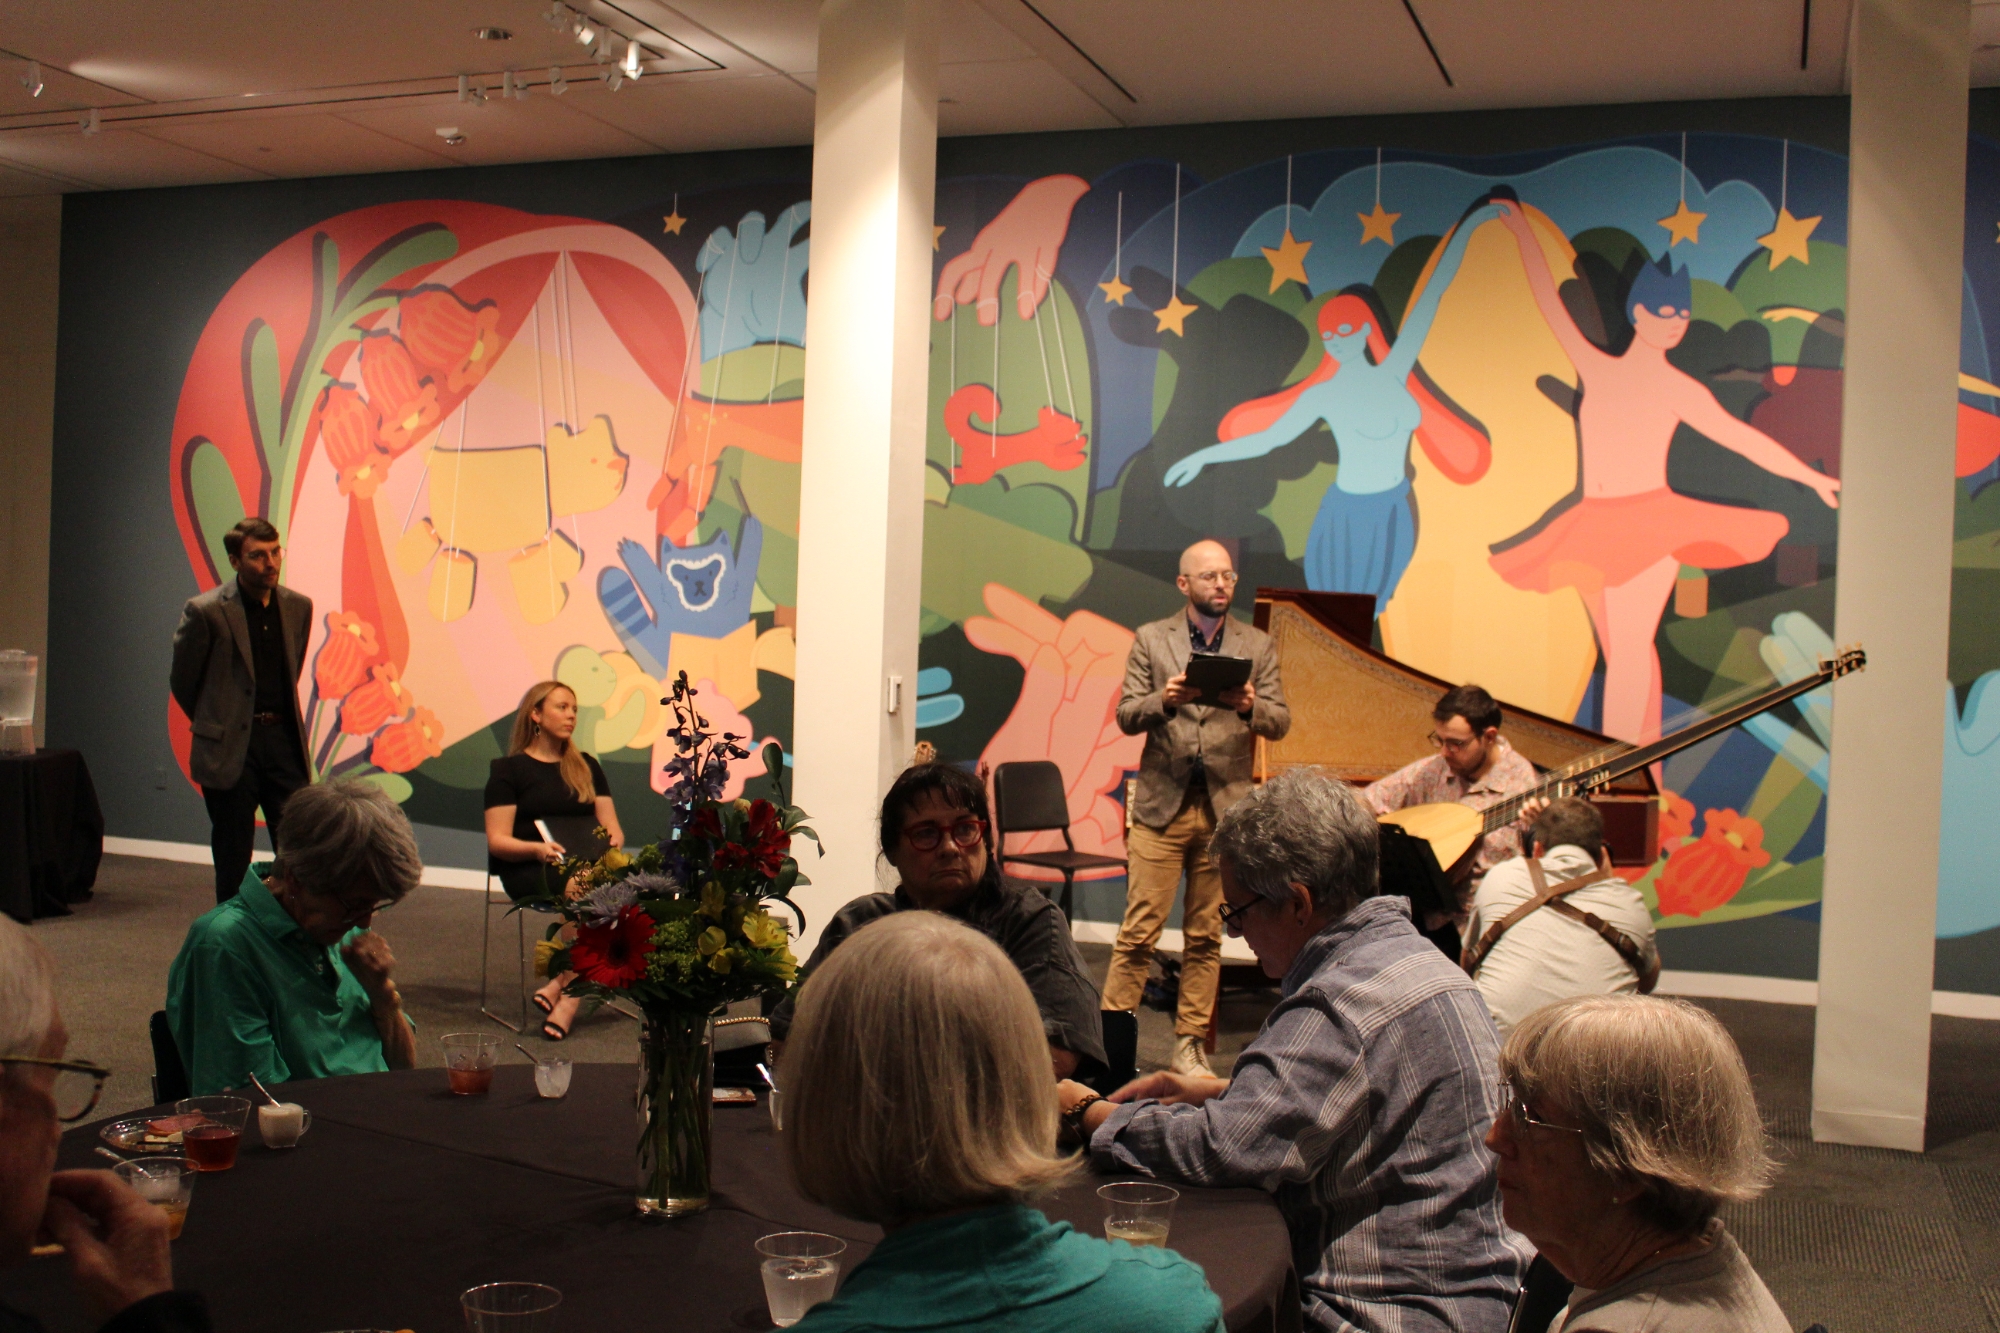 concert performance in front of large colorful mural in gallery space. 